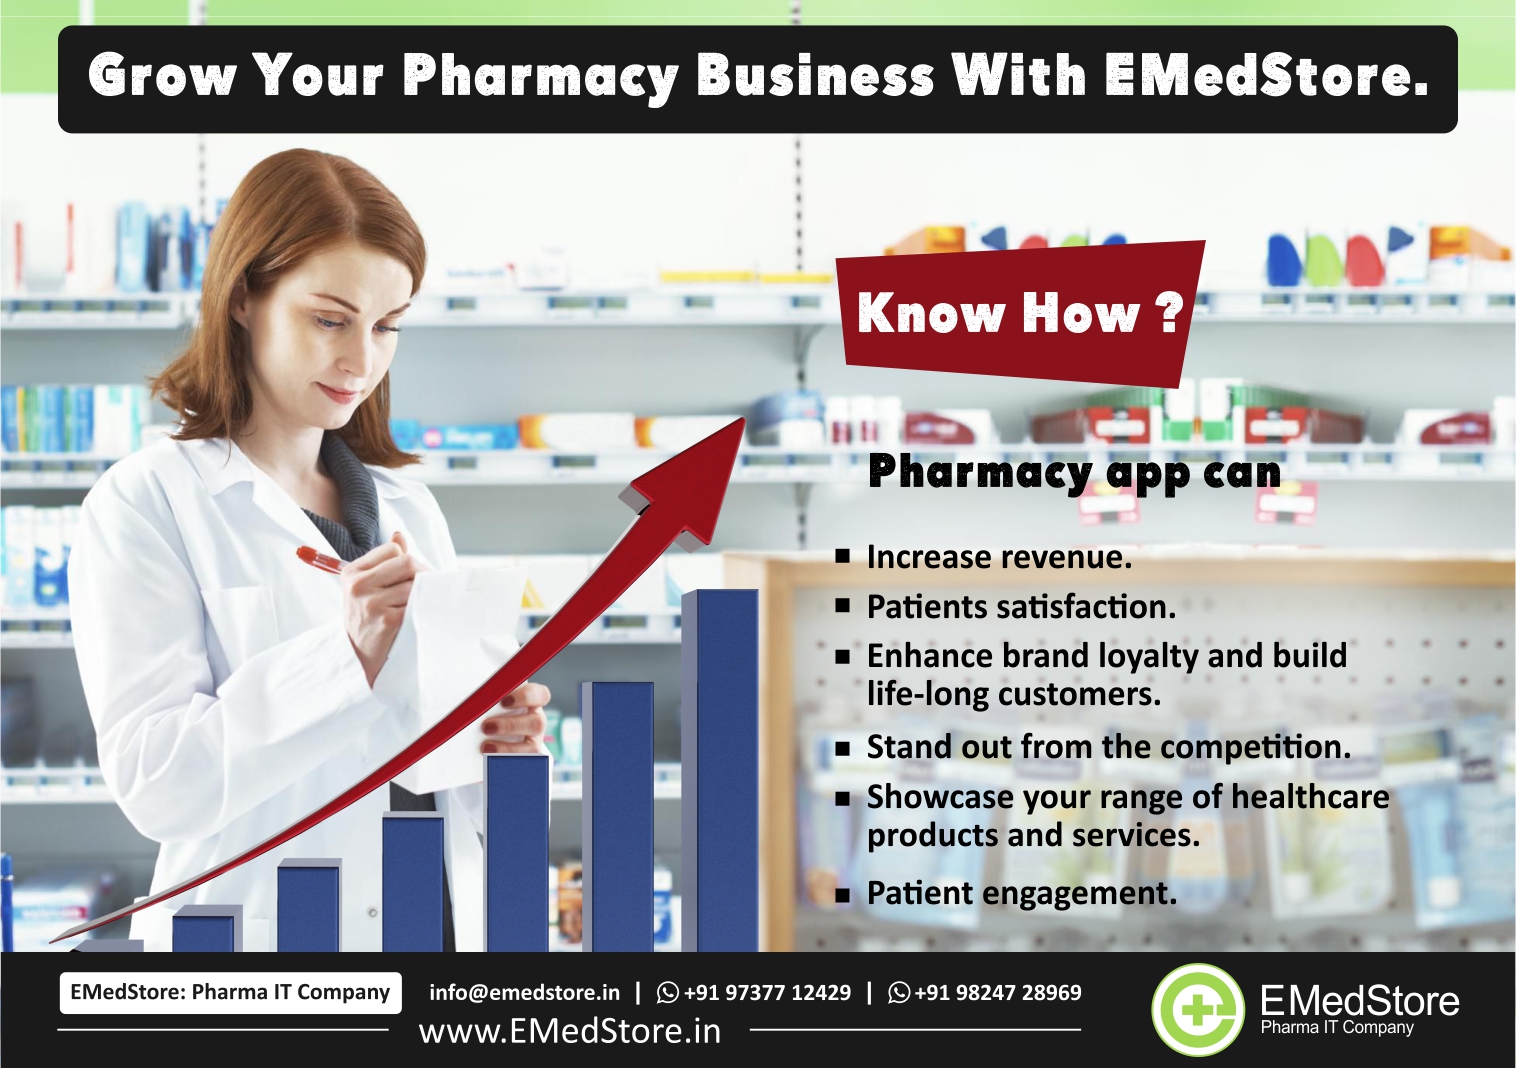 Grow your pharmacy business with EMedStore